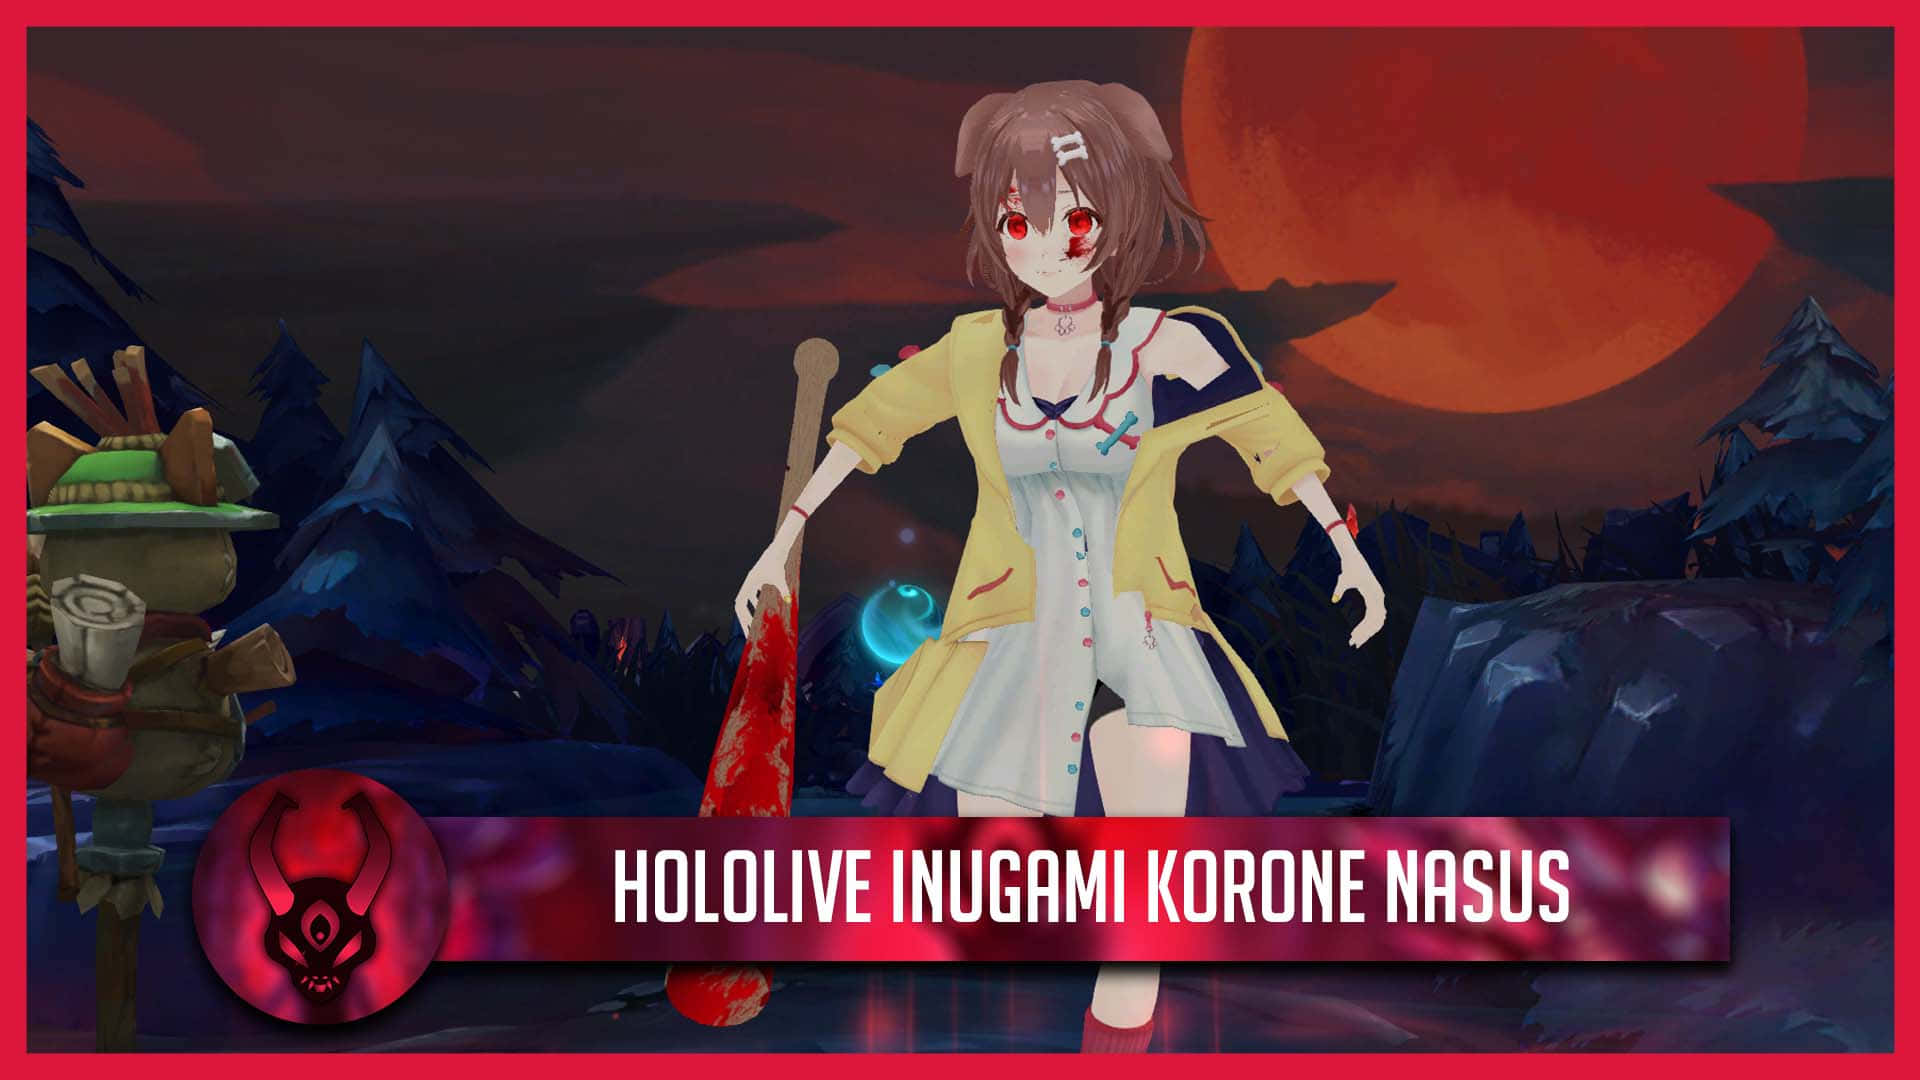 Get to know Inugami Korone, a cute and adorable canine with an electrifying personality! Wallpaper